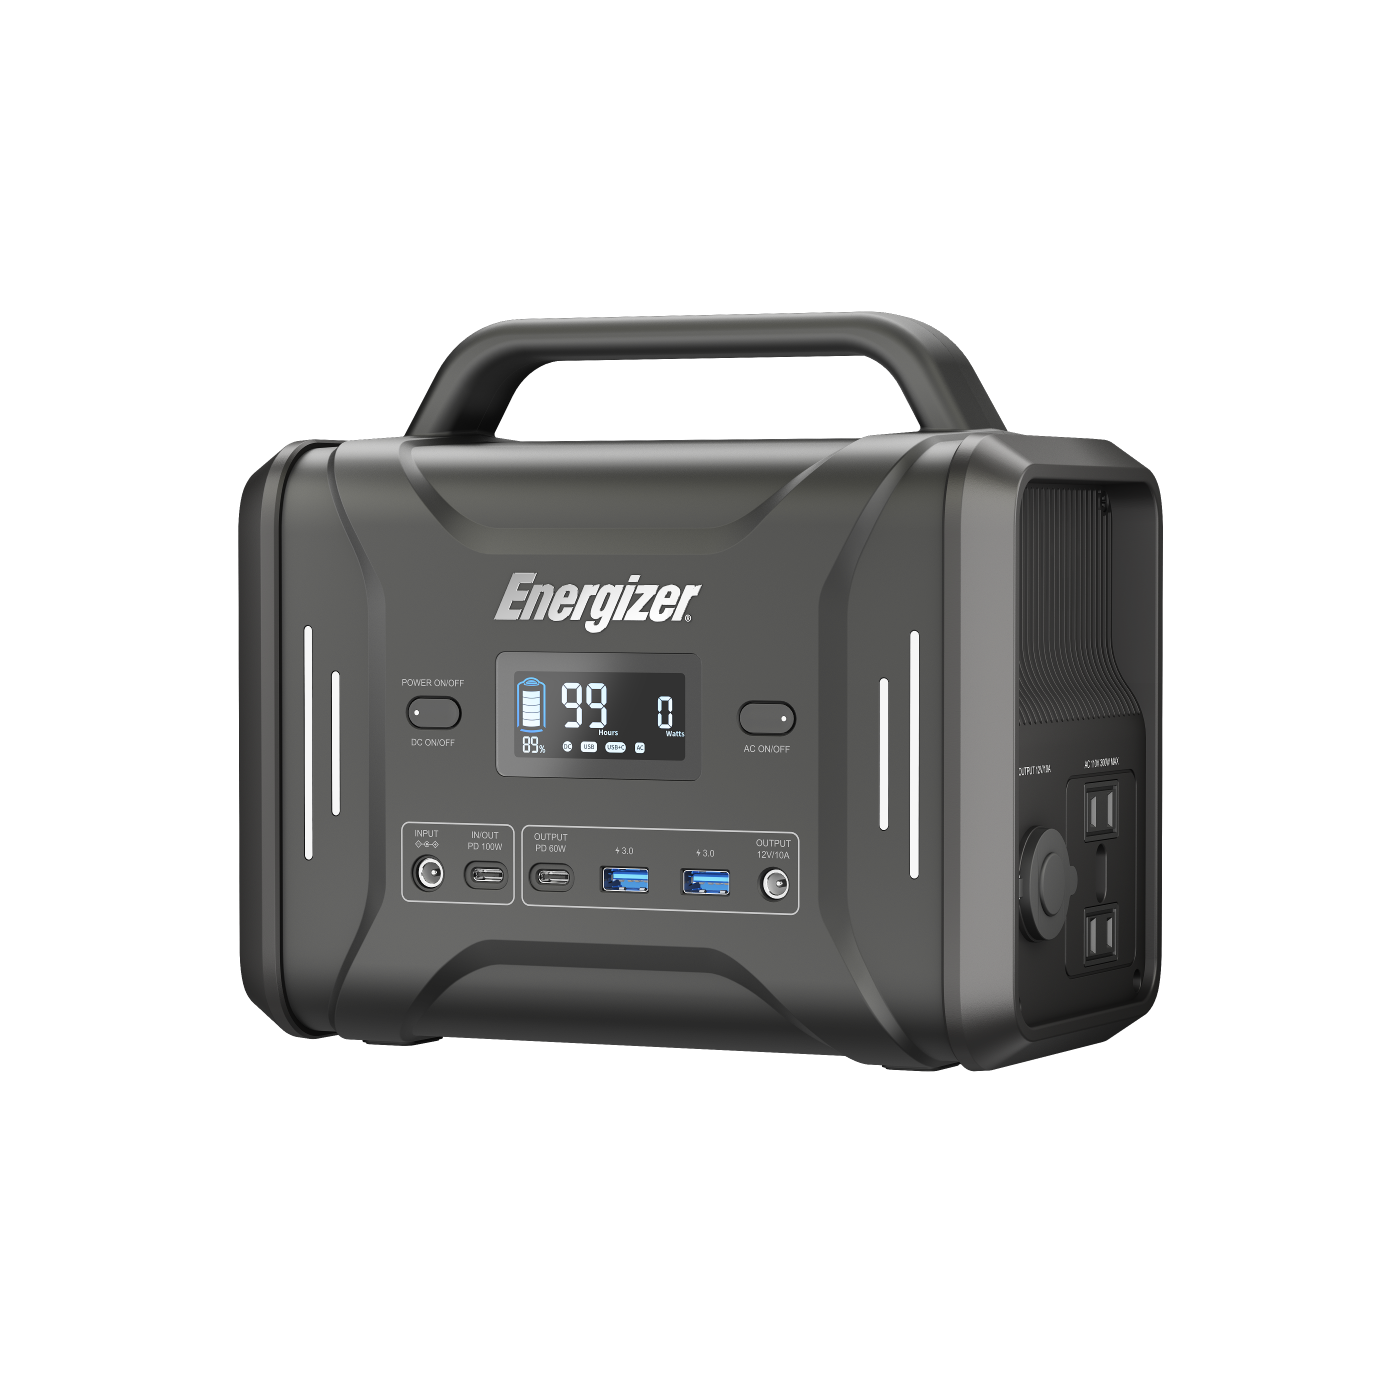 Energizer POWERWIN PPS320 portable power station